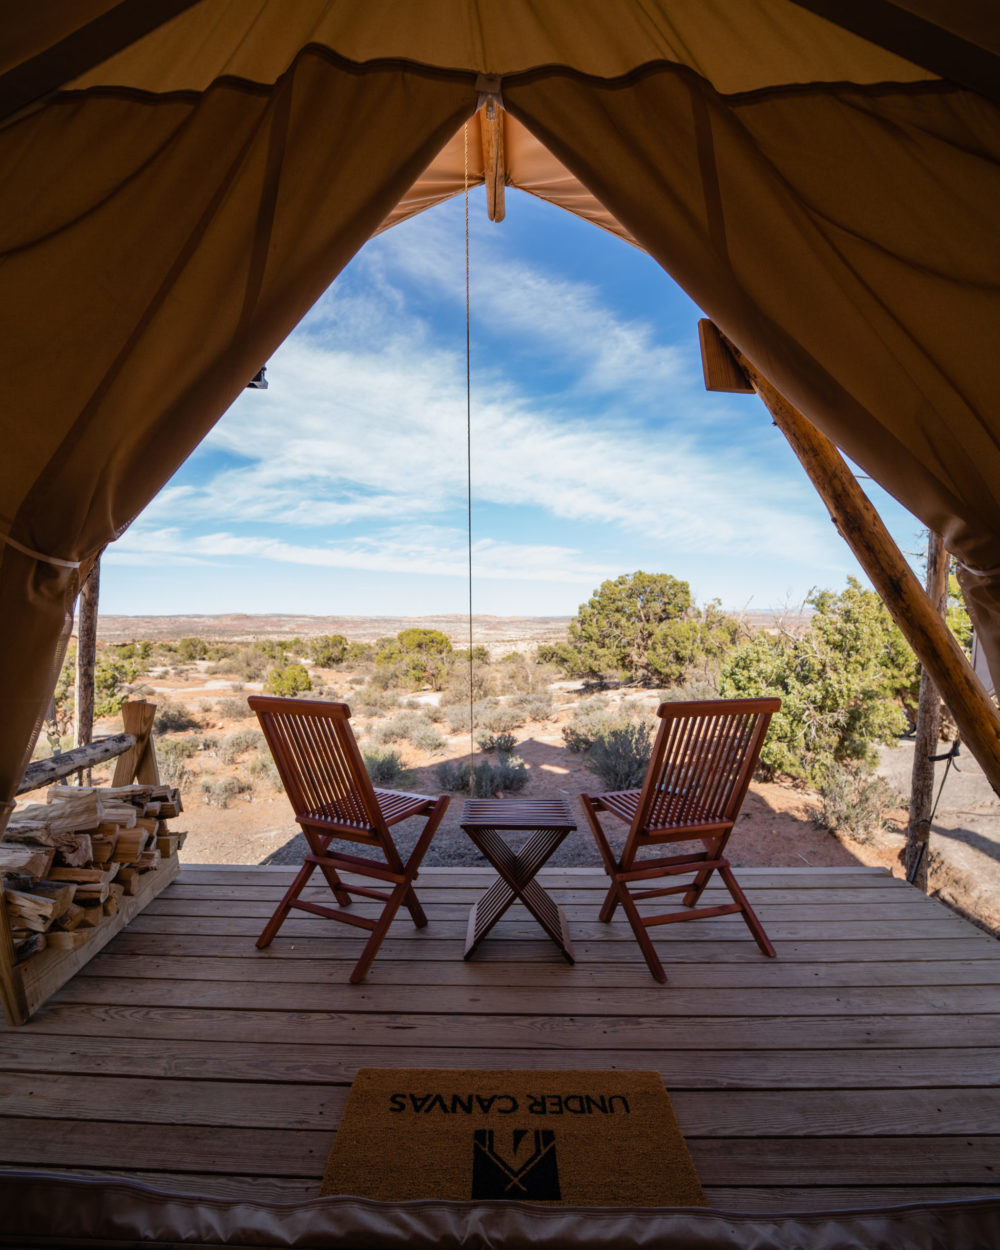 Glamping sites in Utah are popping up with vigor, but not every community in the areas affected is thrilled.